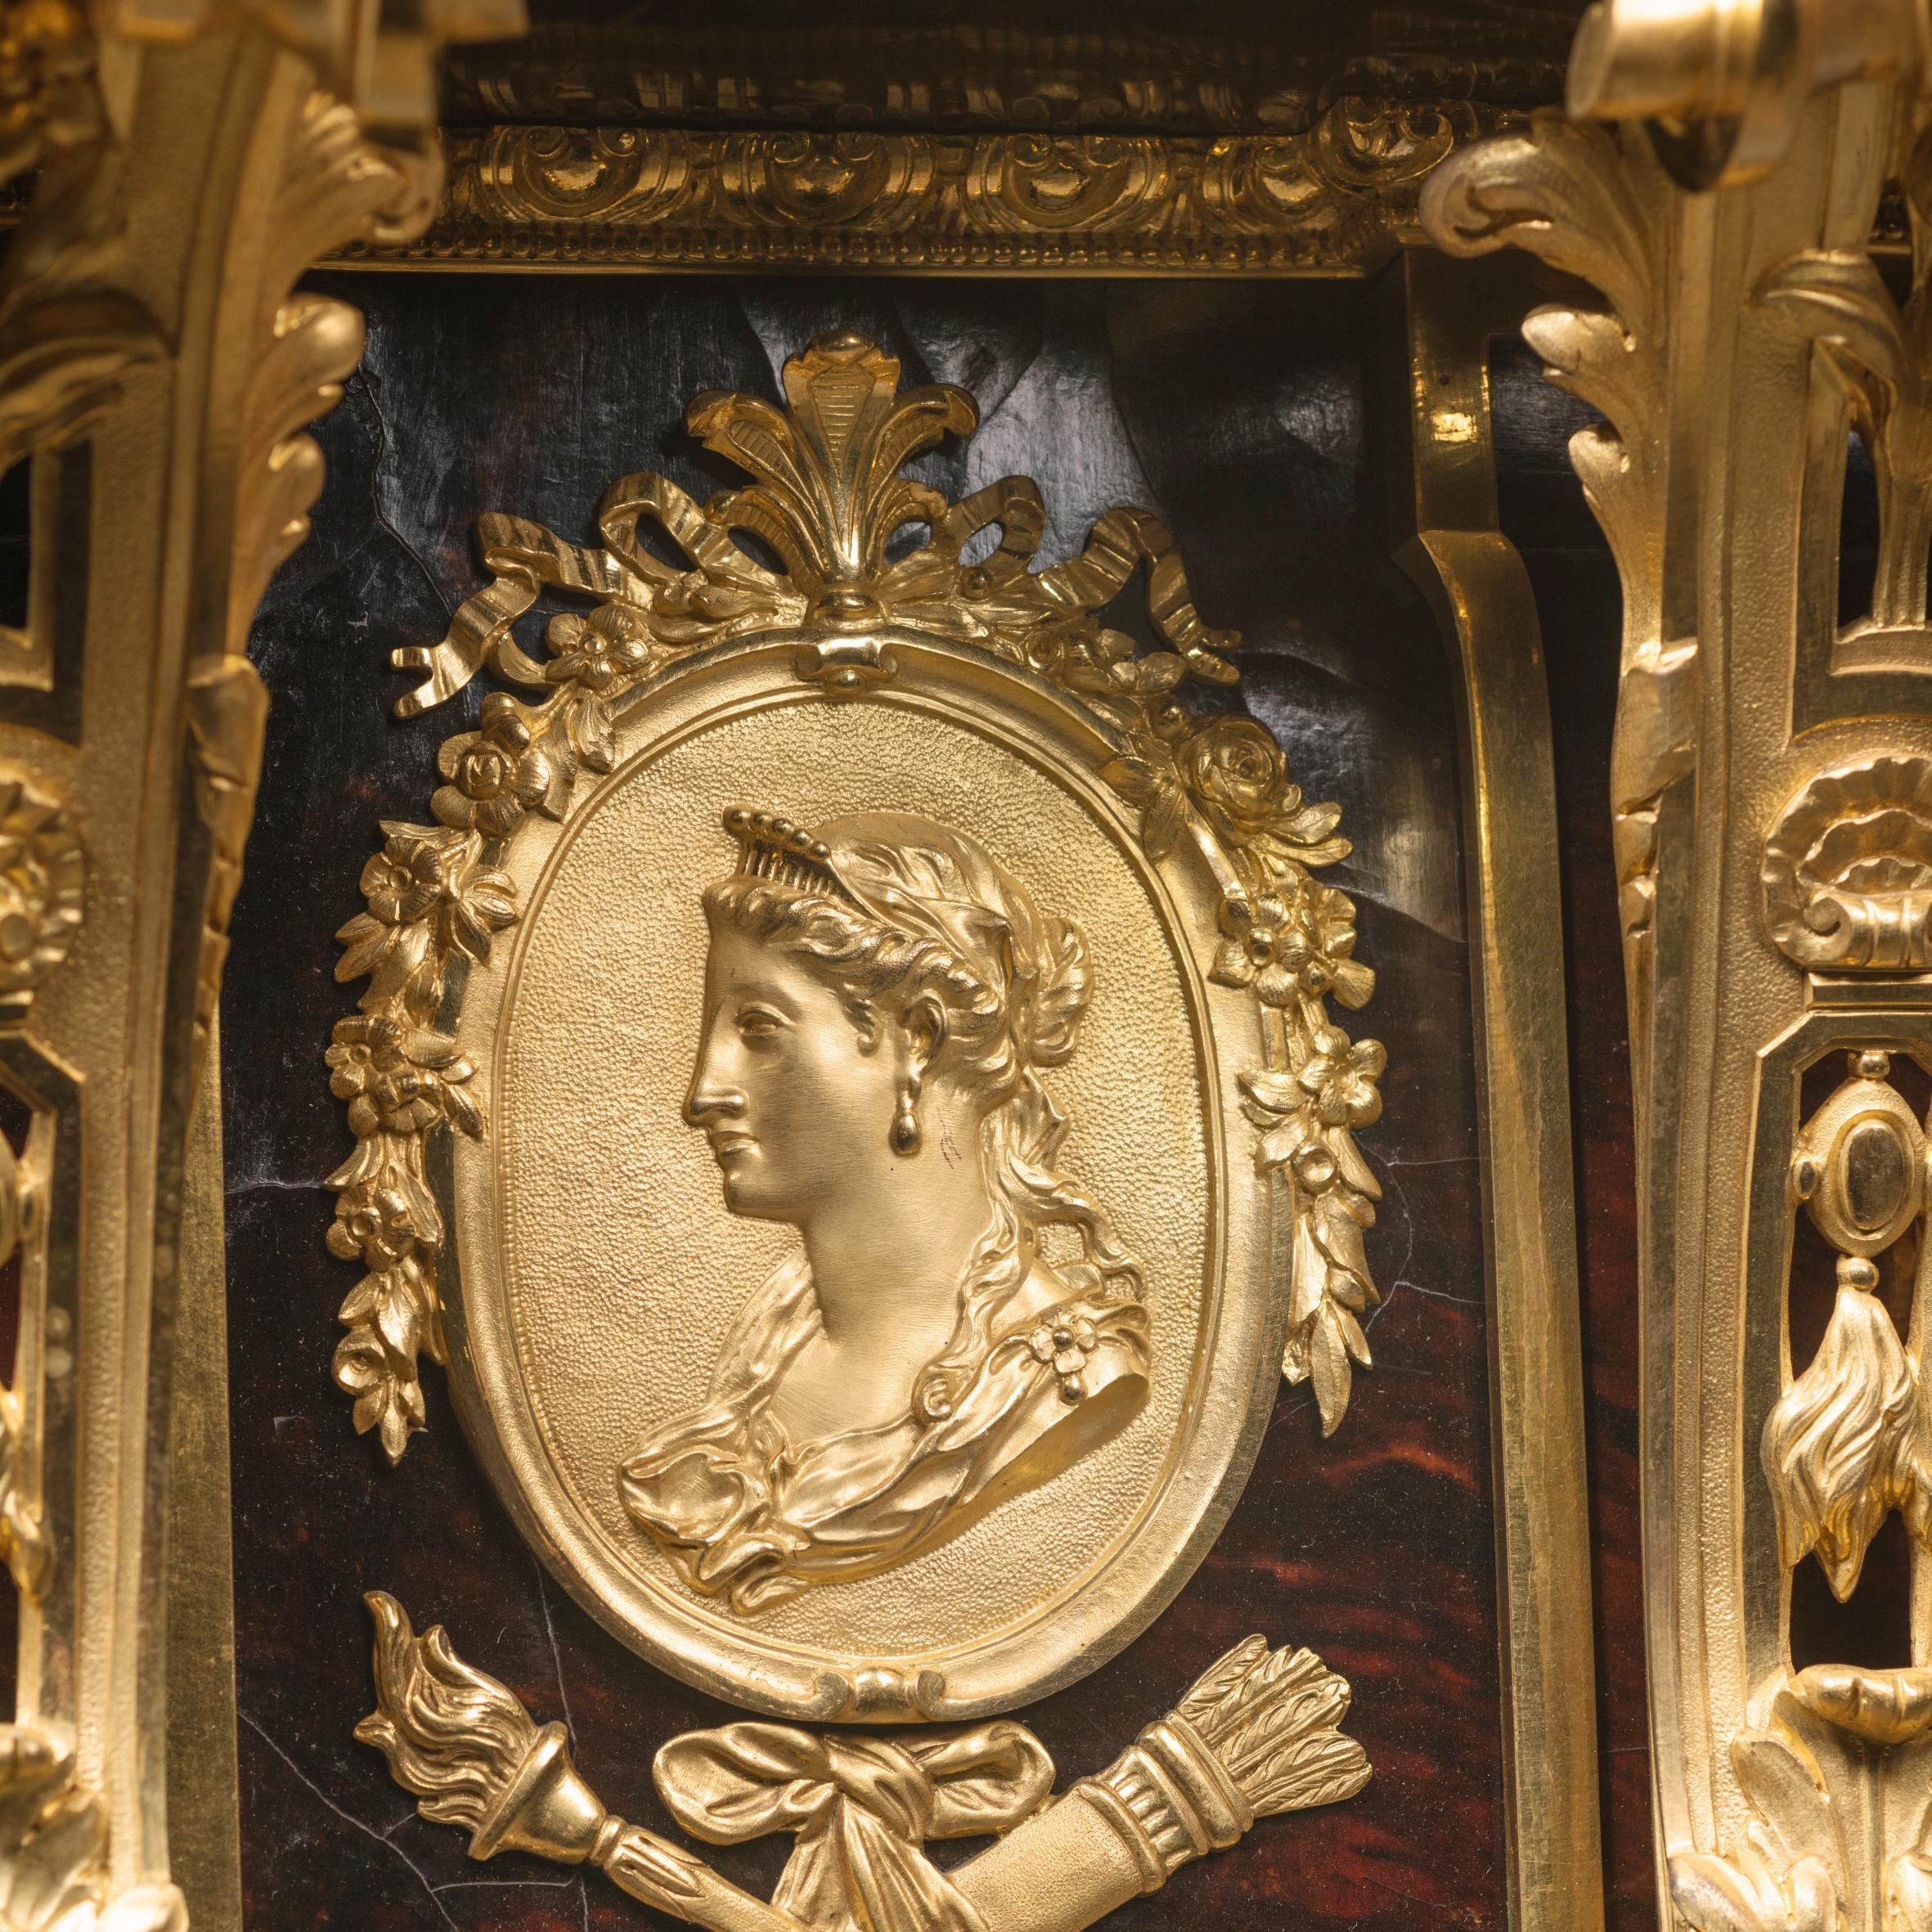 A Regence Style Grand Cartel de Applique In the Manner of André-Charles Boulle For Sale 4